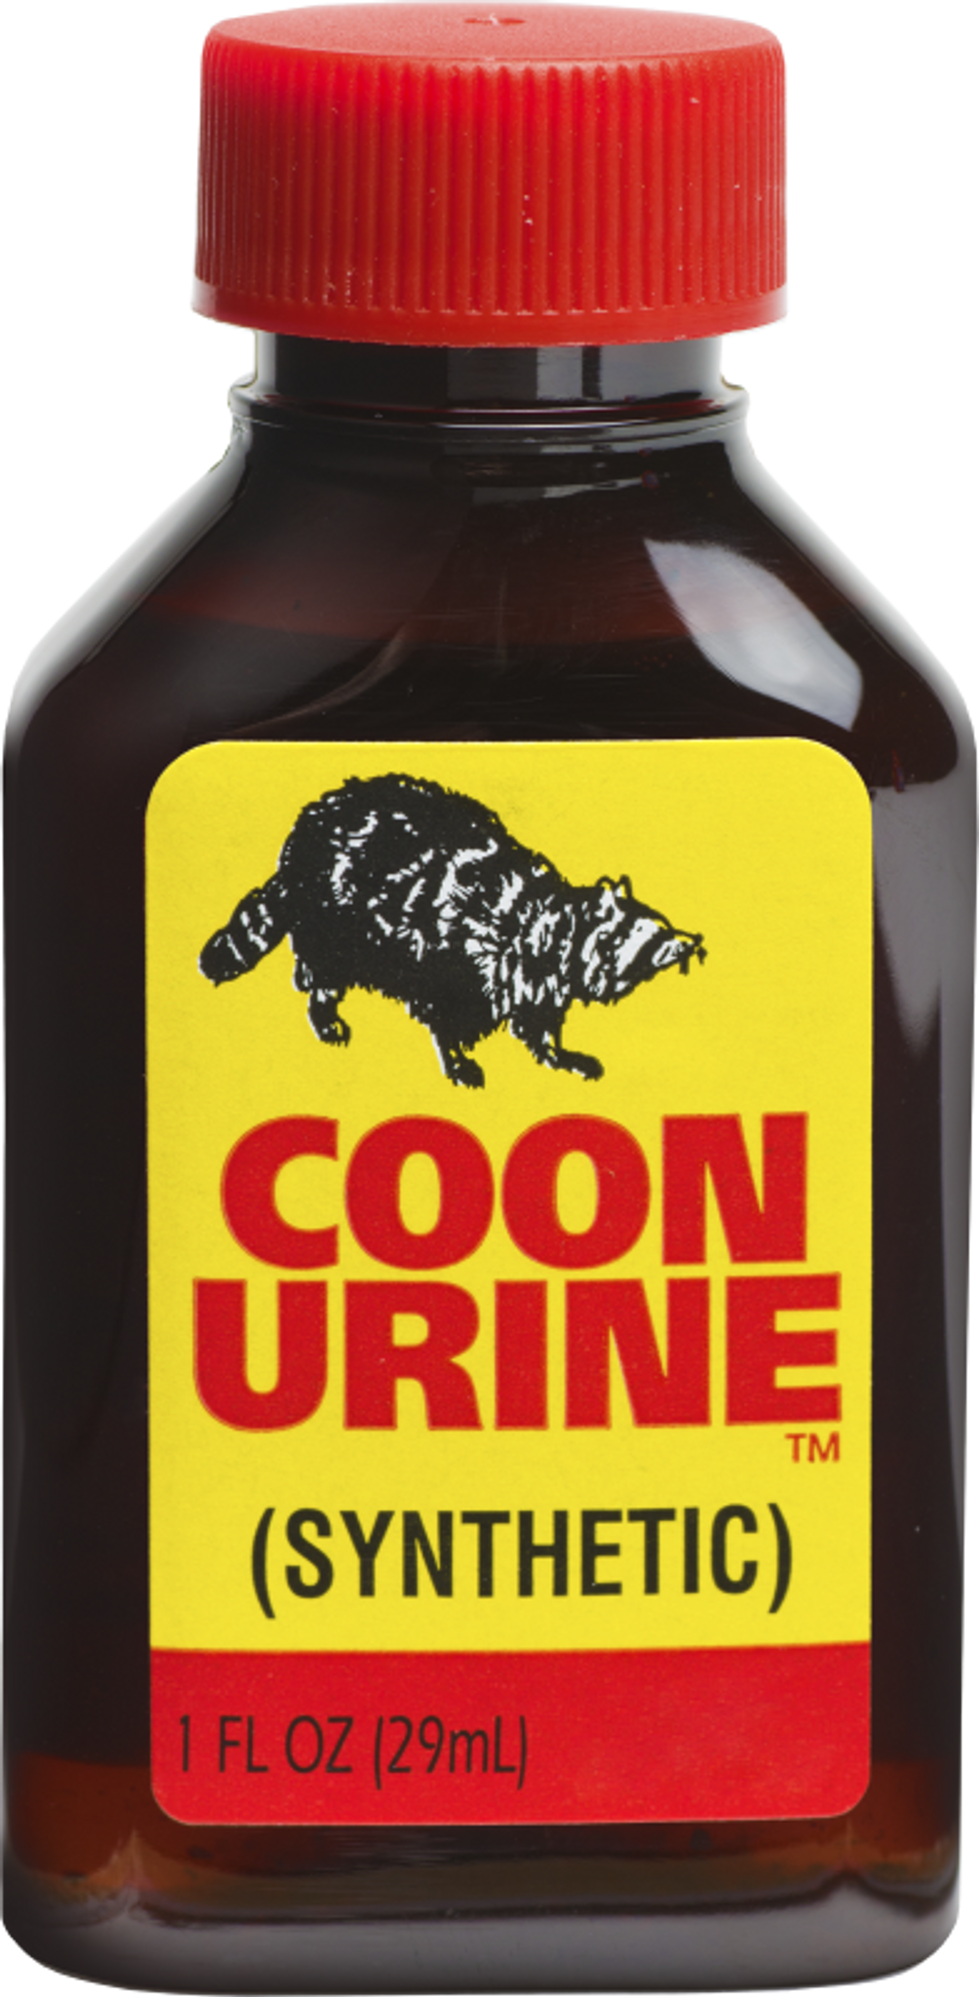 Coon Urine Synthetic 1 FL Oz